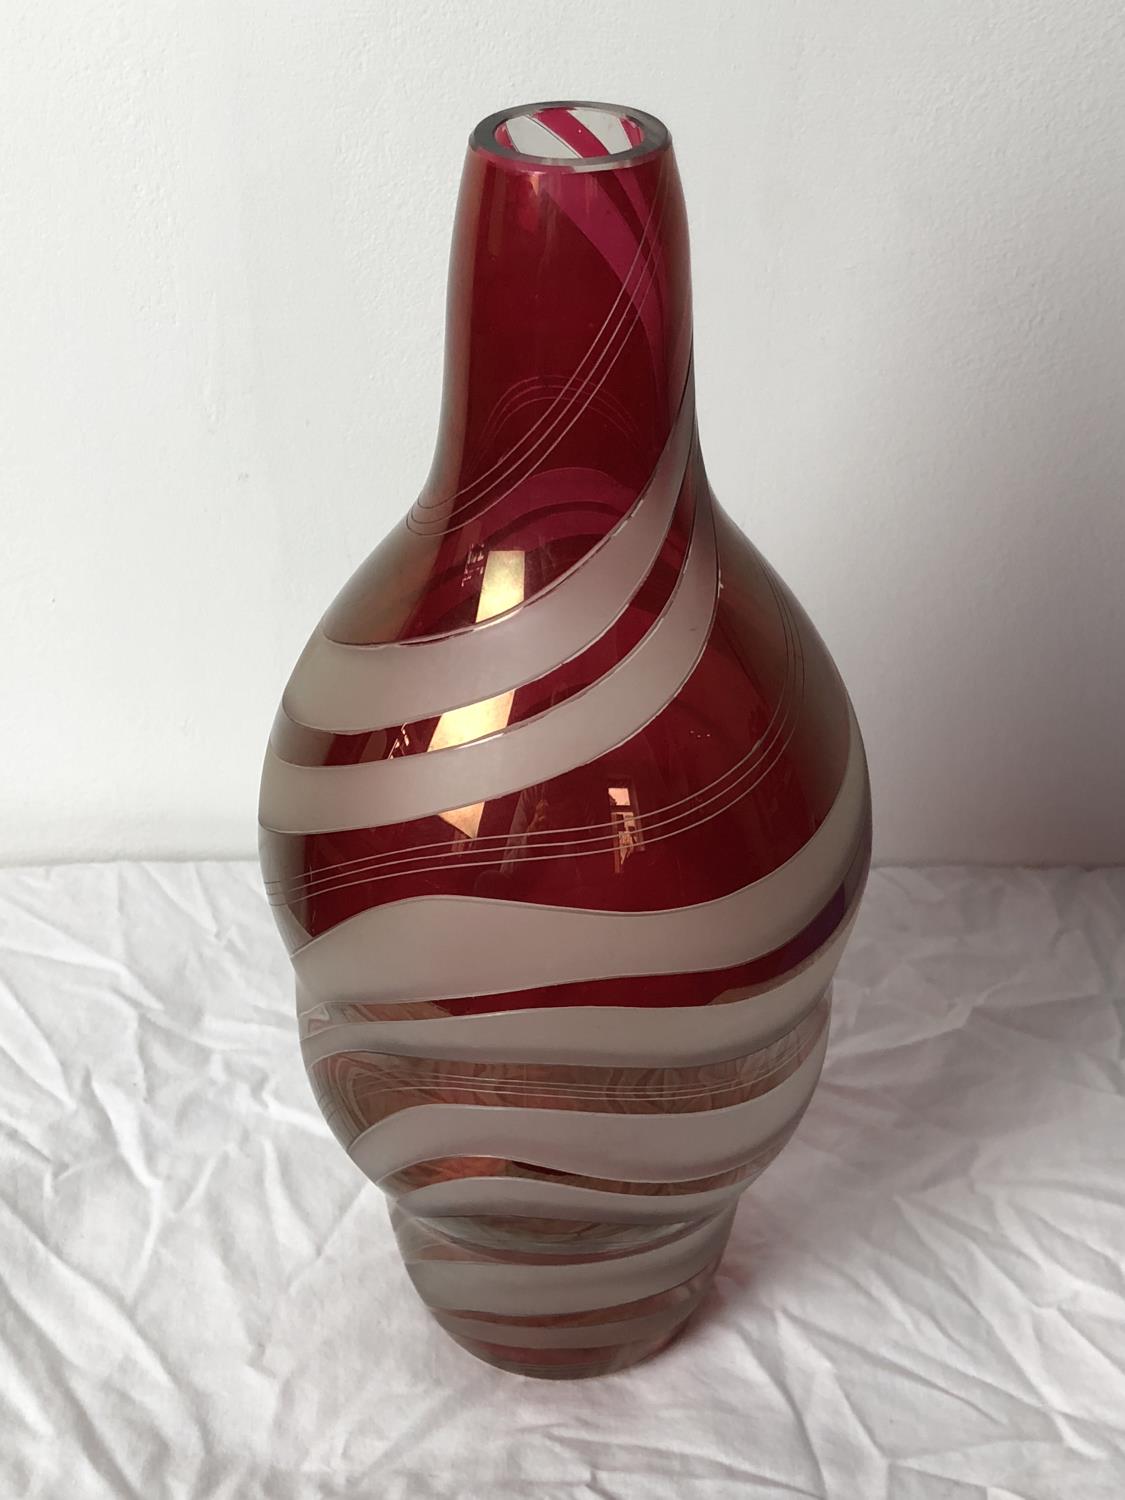 Karel Wünsch for Borske Sklo - A ruby red flashed and frosted colourless glass flattened bottle - Image 2 of 4